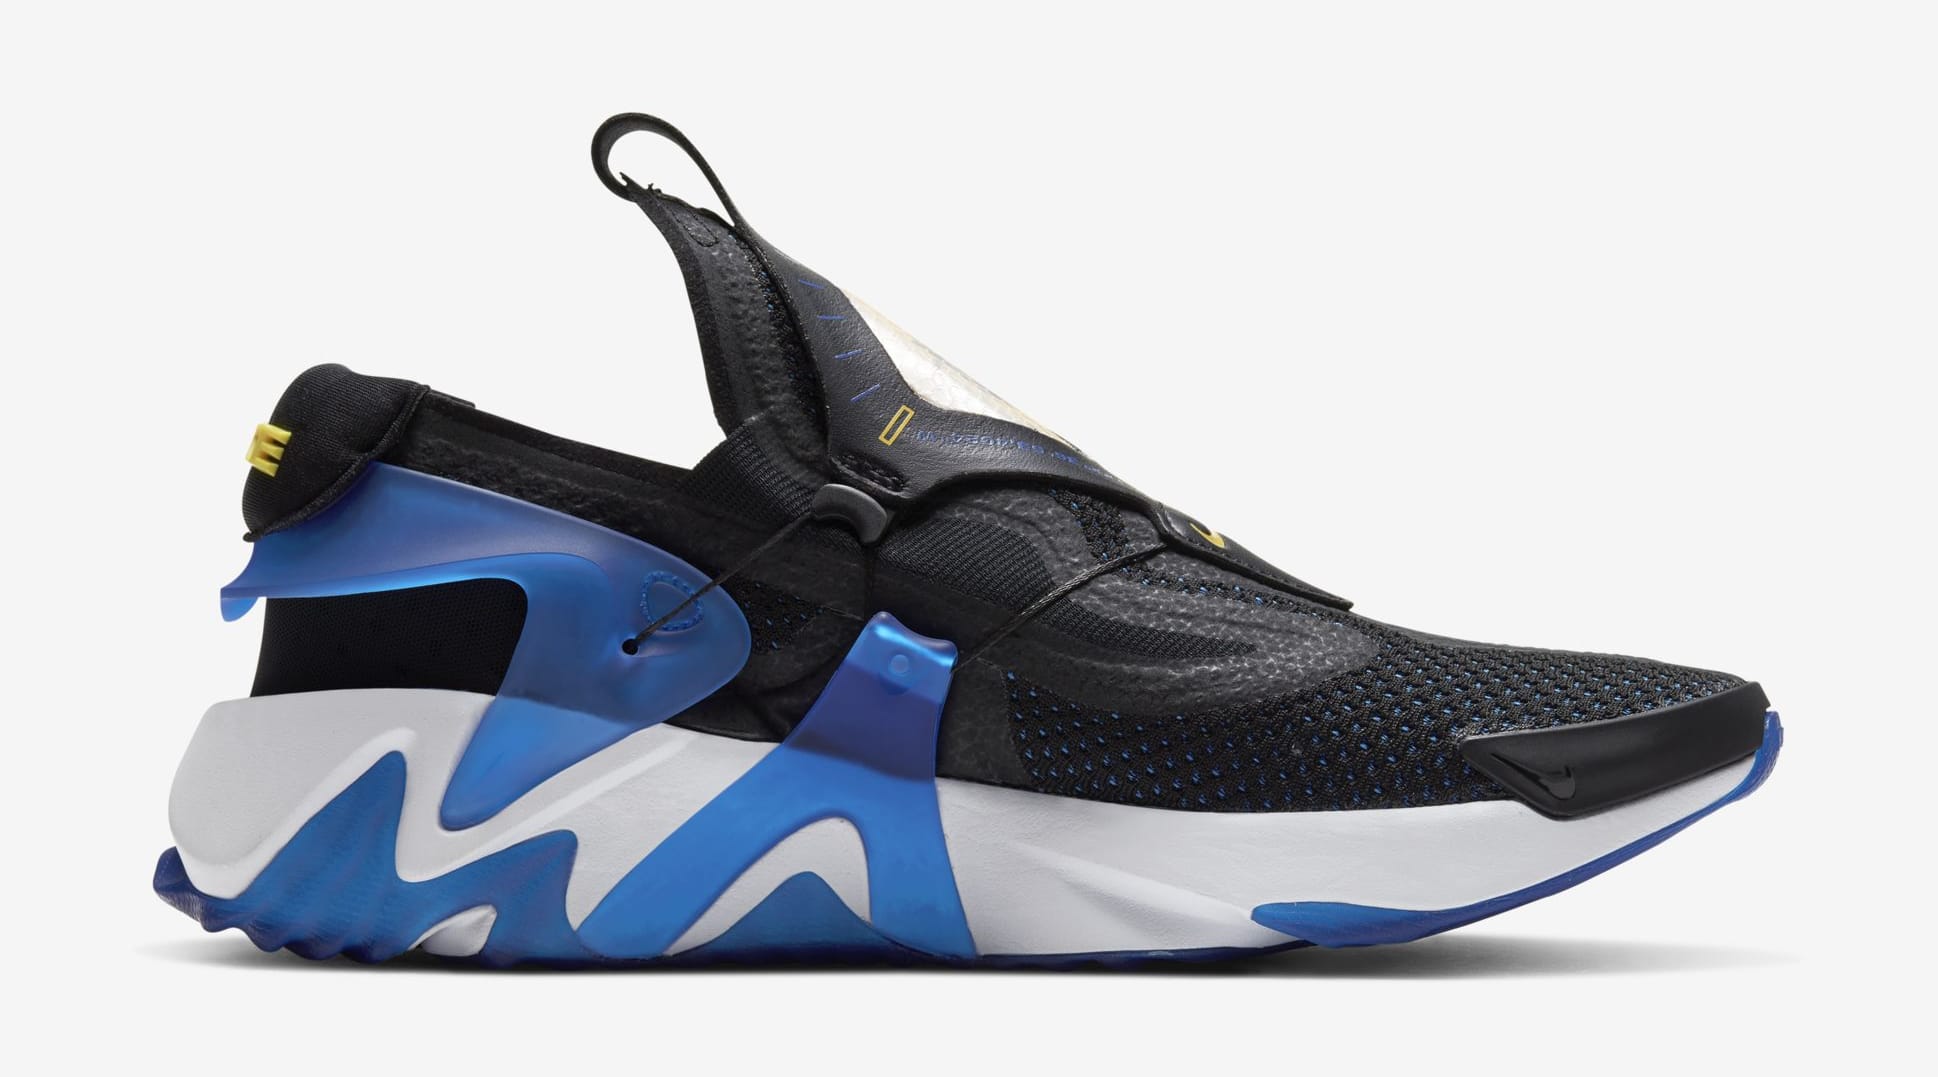 Nike's Auto-Lacing Adapt Huarache Revealed In New Colorway: Photos